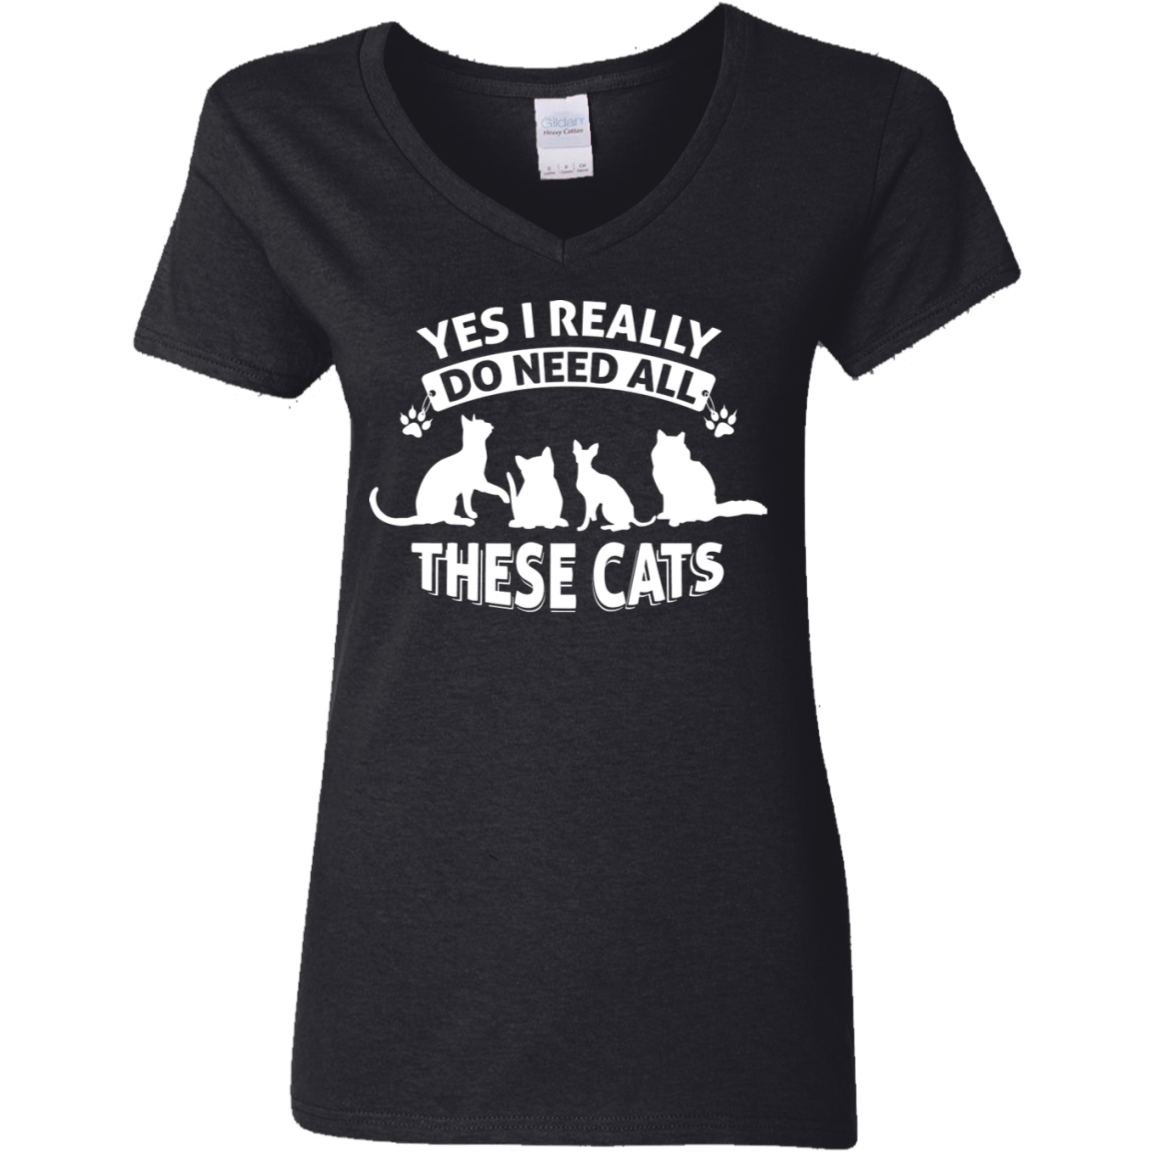 Yes I Need All These Cats - Ladies V Neck.